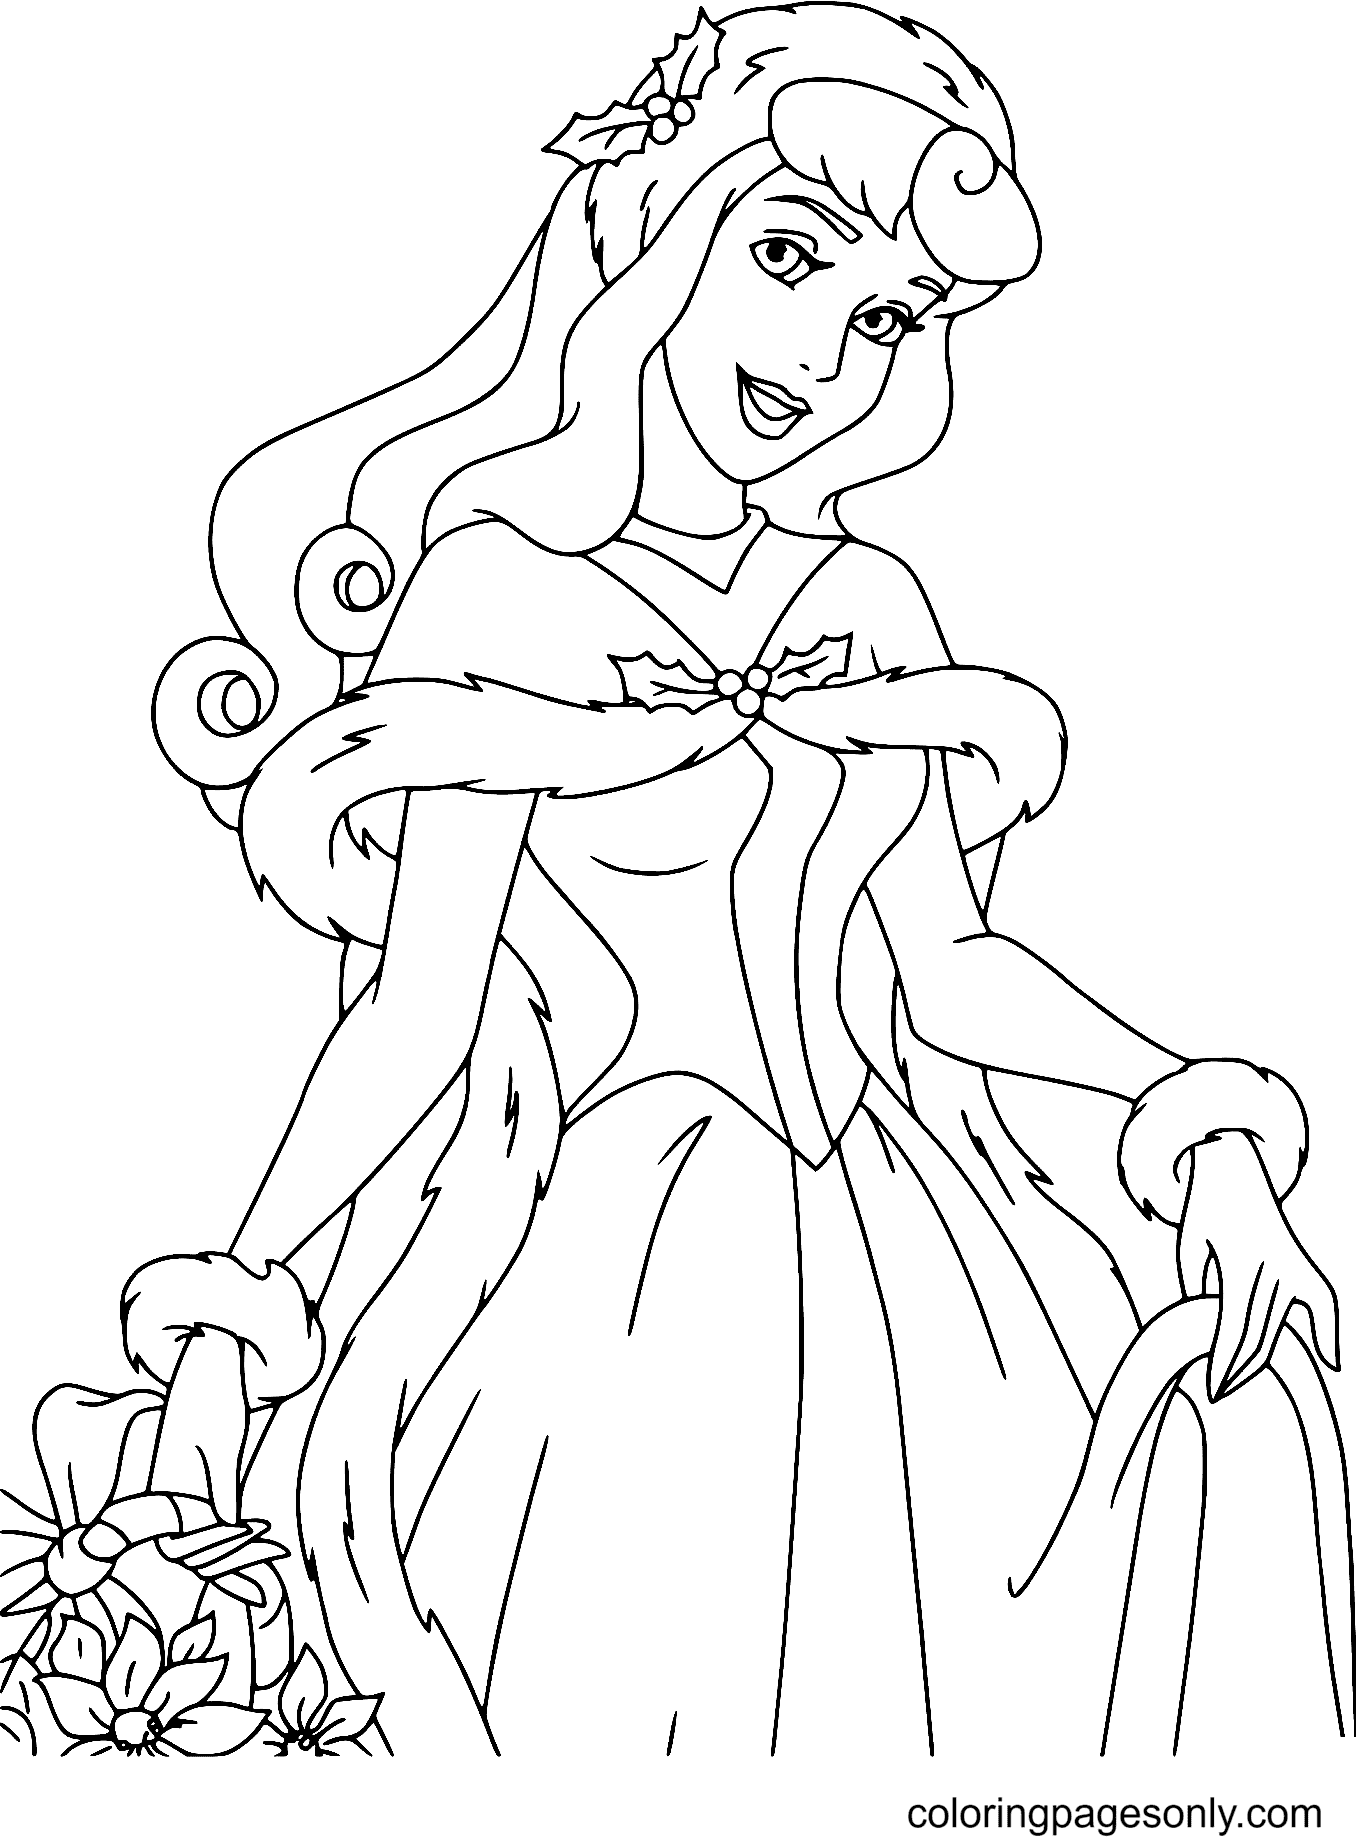 Aurora ready for Christmas Coloring Pages